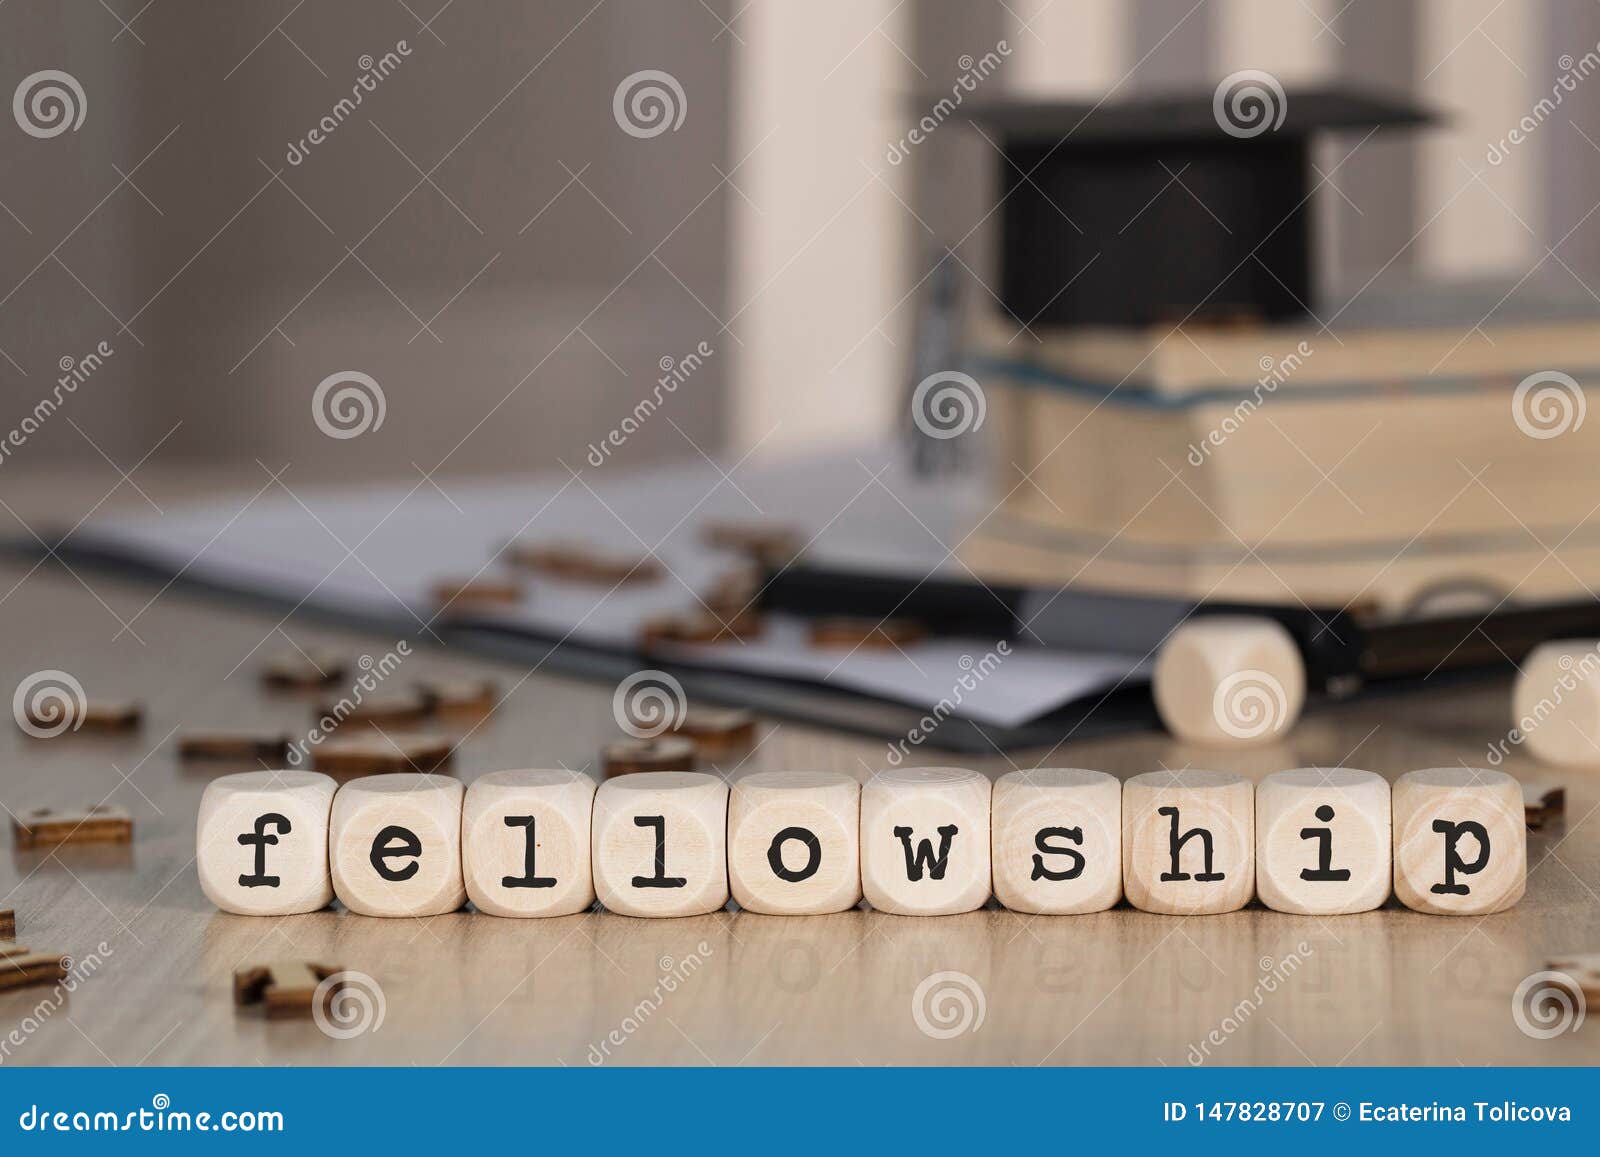 word fellowship composed of wooden dices